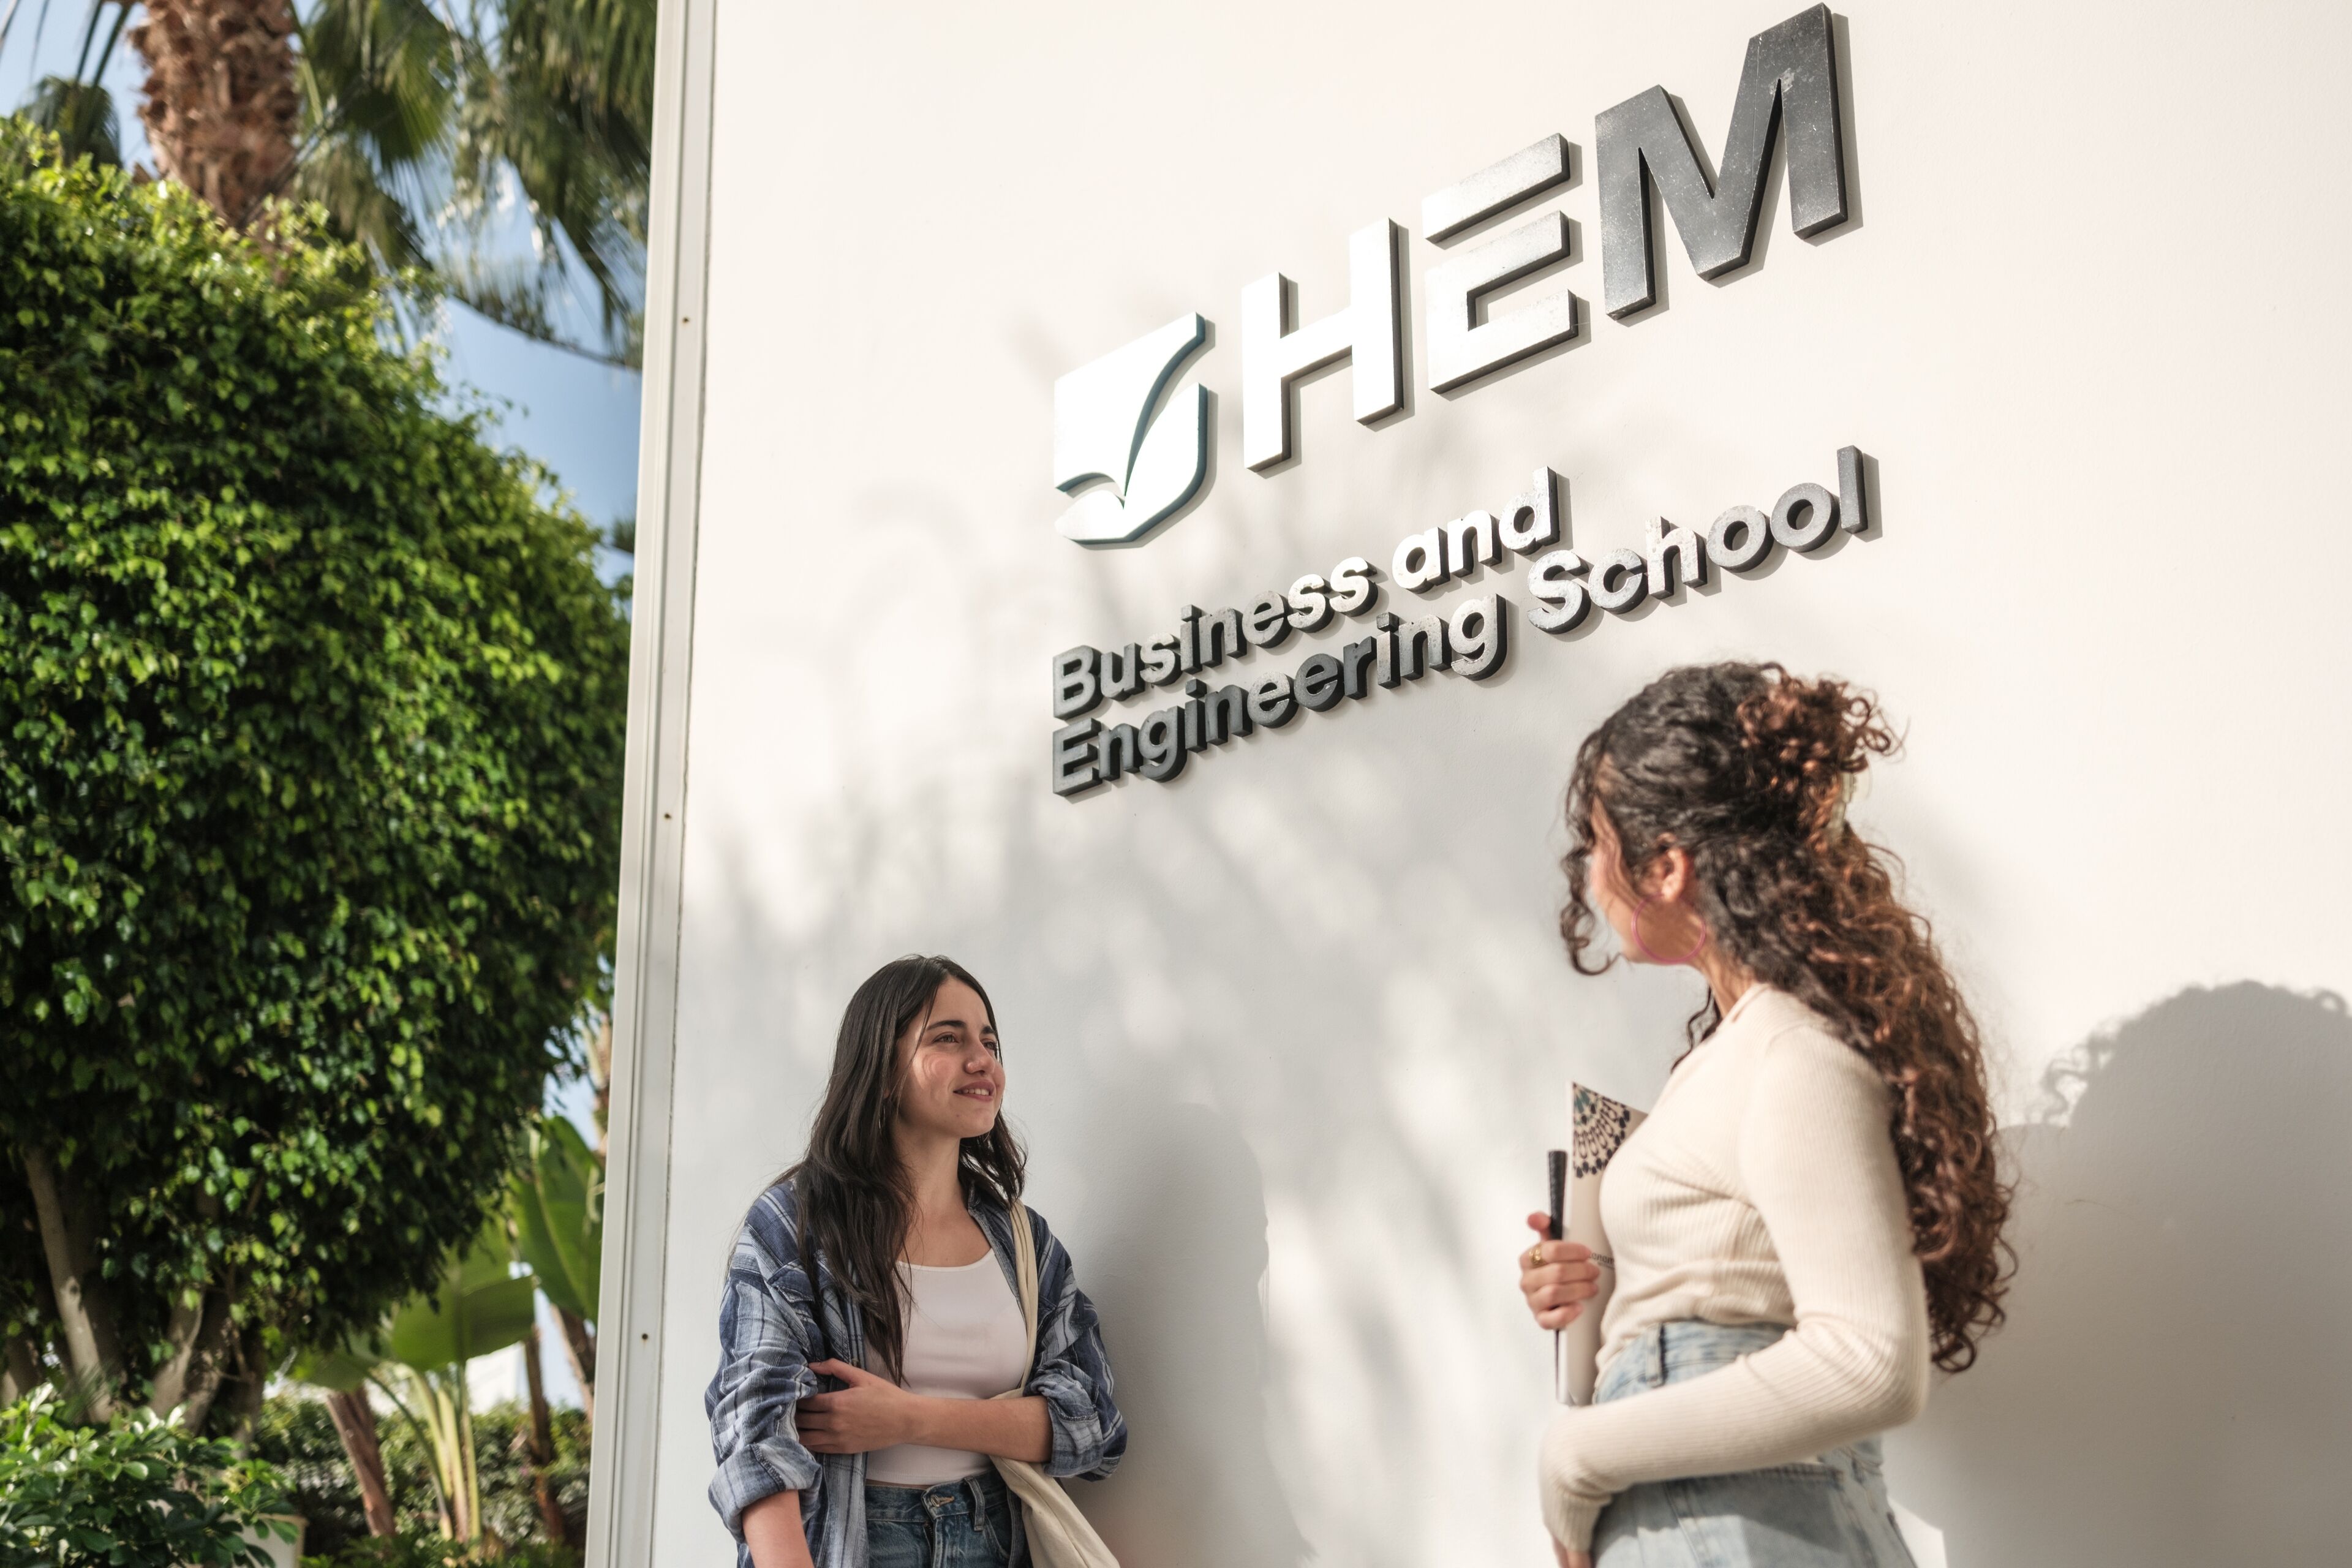 Two students converse by the school sign, "HEM Business and Engineering School," in a sunny outdoor setting with greenery.